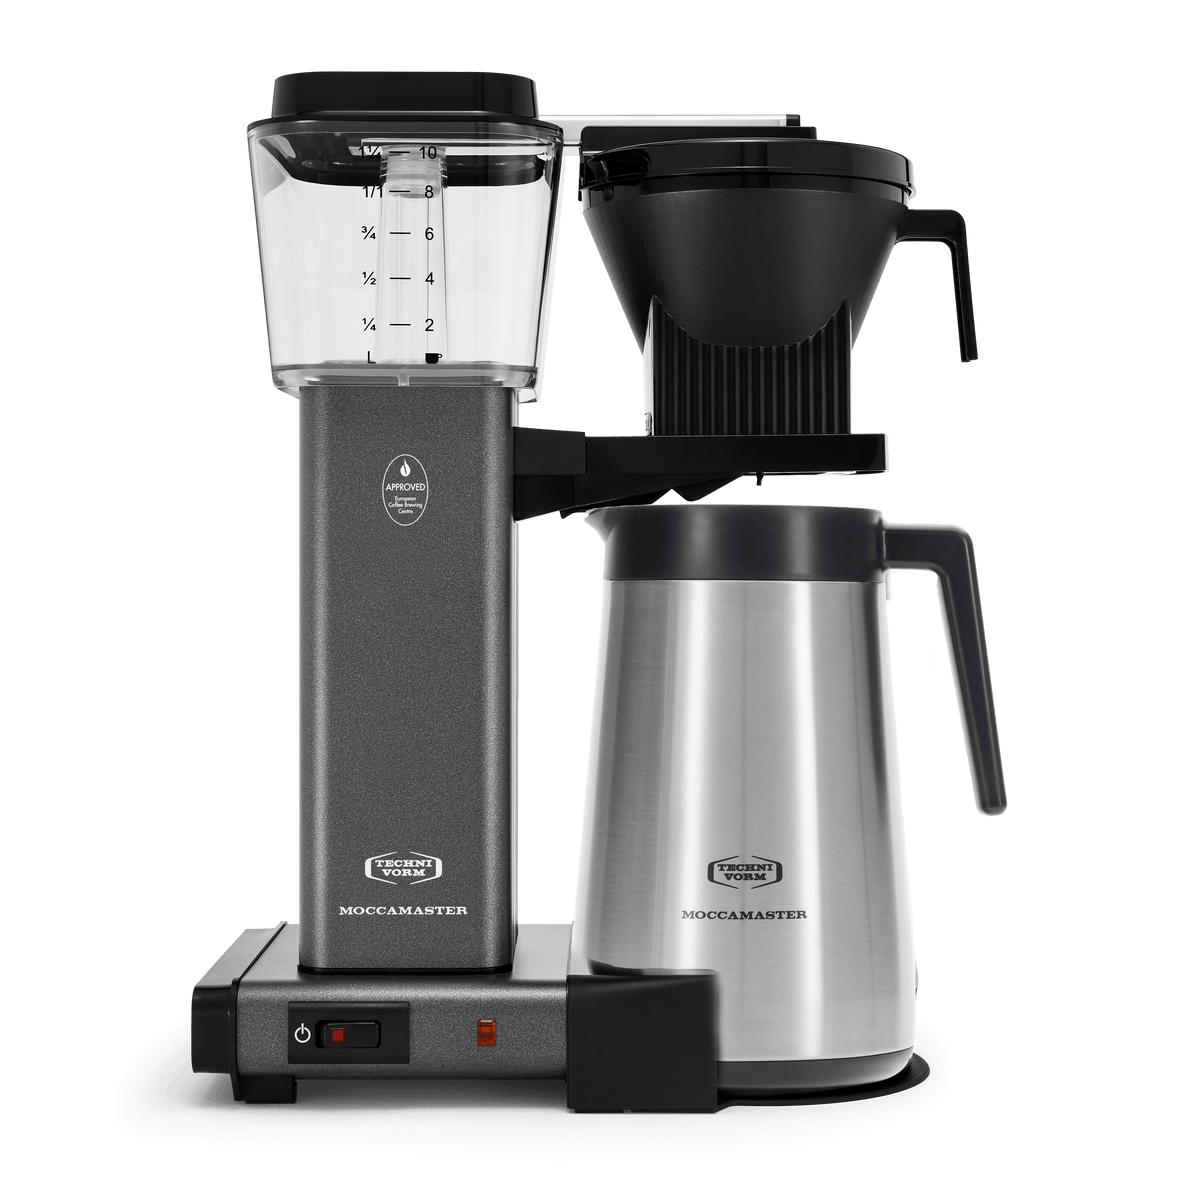 Front shot showing Moccamaster KBGT in Stone Grey, with rectangular tower and base, clear acrylic water reservoir with fill level marks, power and switch, stainless steel thermal carafe with black handle, and black automatic brew basket.  